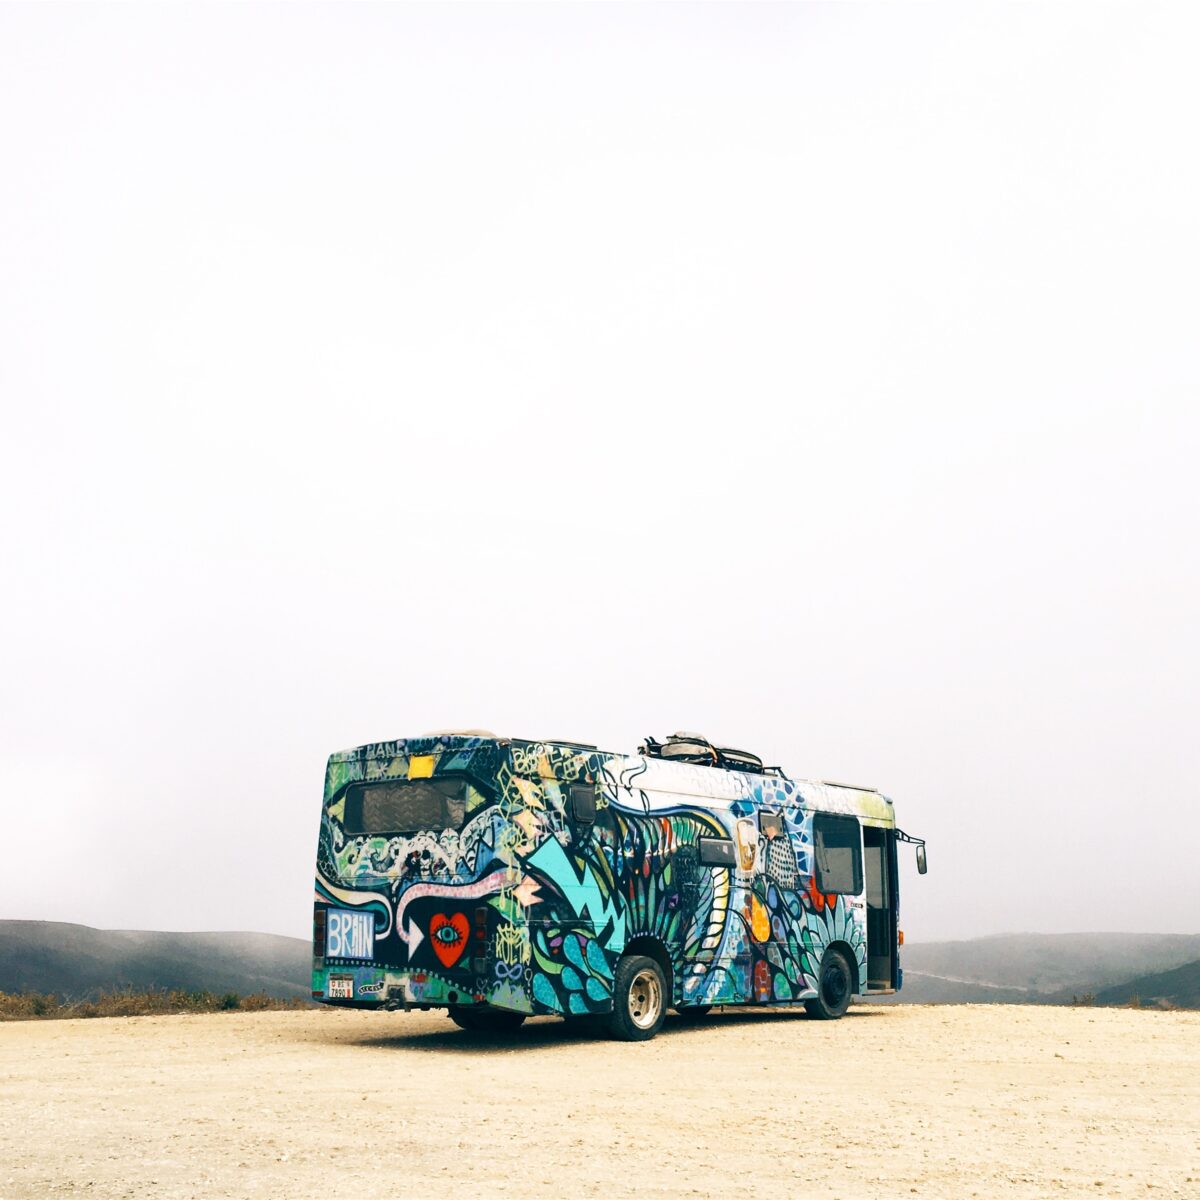 Painted coach bus